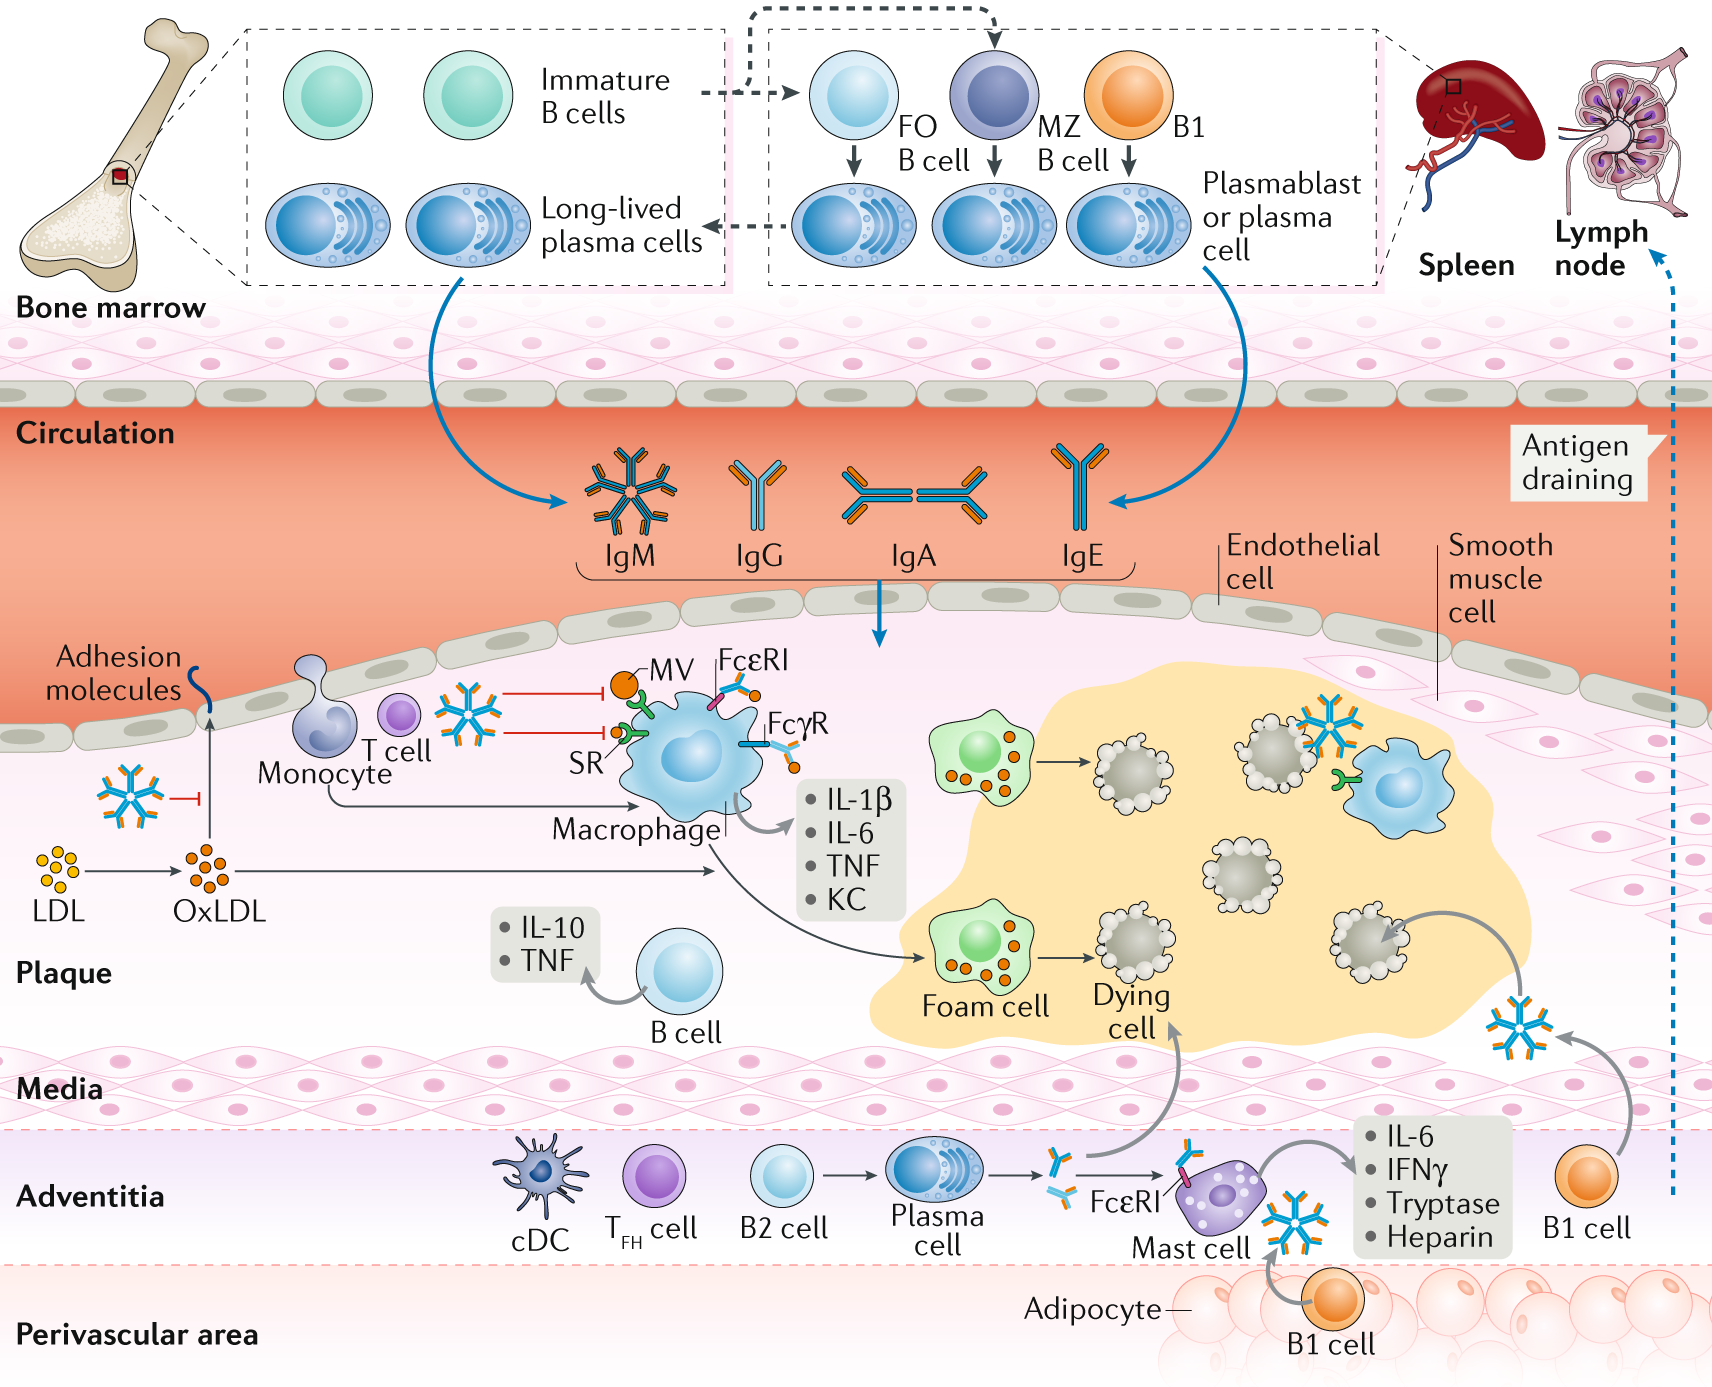 Forvirrede Gum Foster The role of B cells in atherosclerosis | Nature Reviews Cardiology